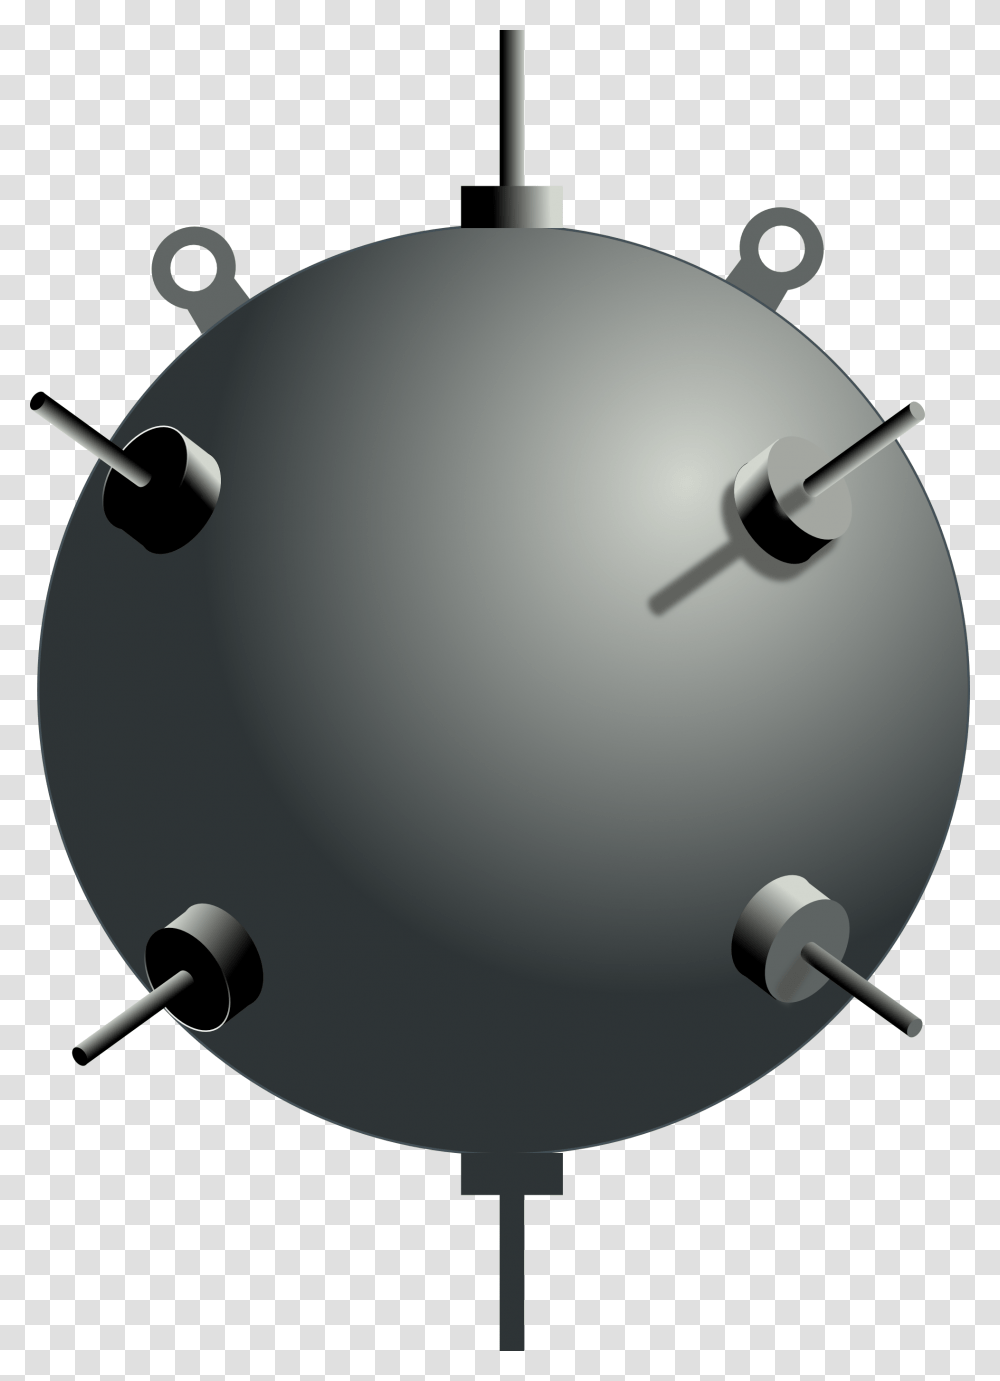 Mines, Weapon, Lamp, Weaponry, Bowling Transparent Png